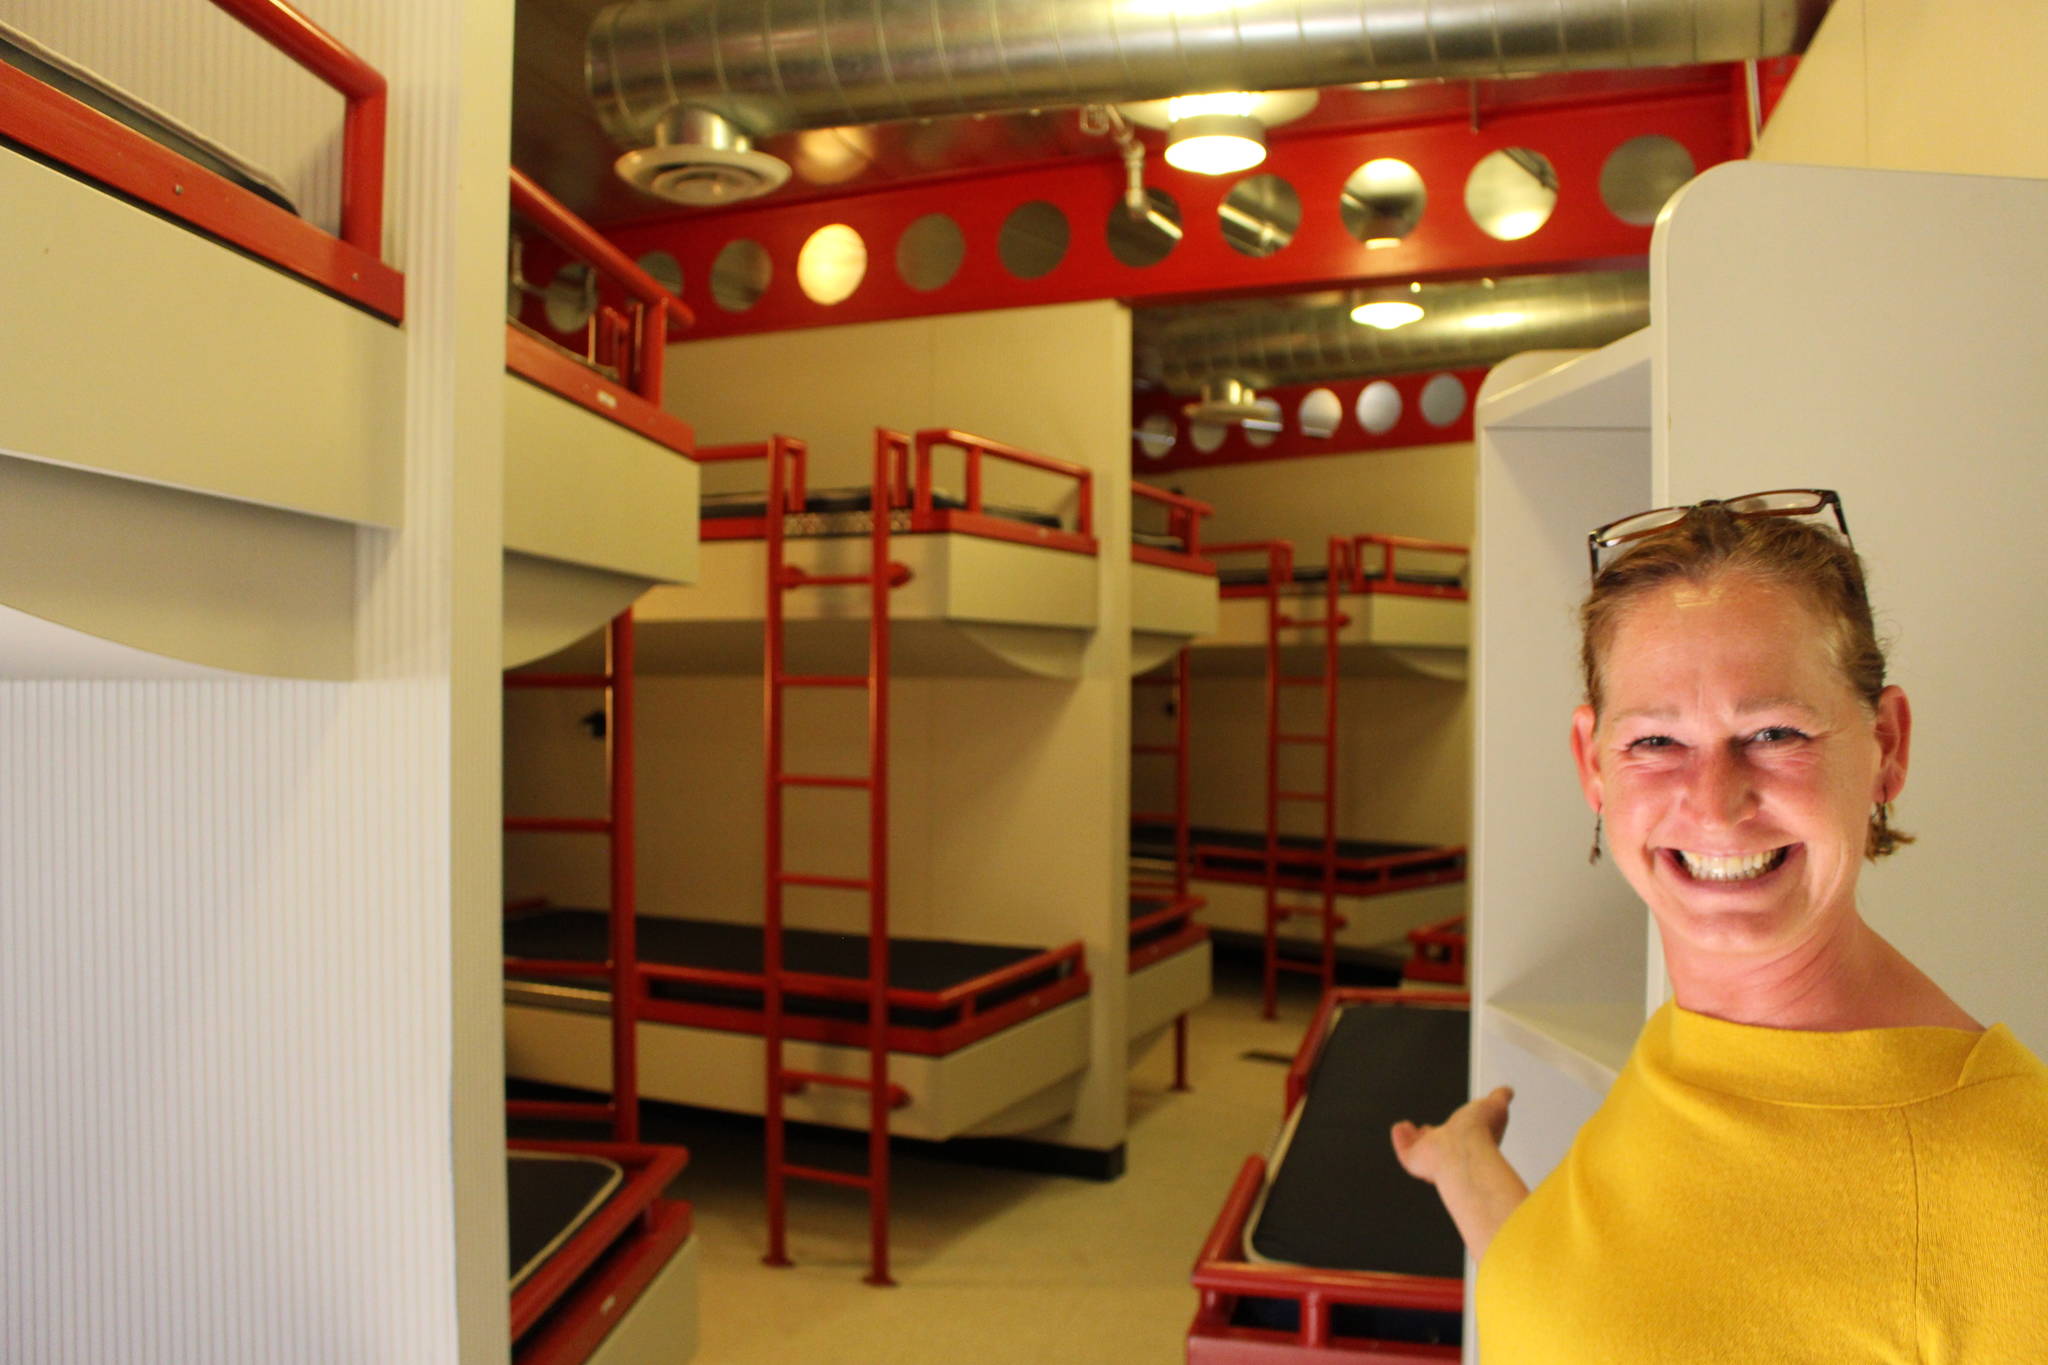 Marnie Alcott, the CEO of the Challenger Learning Center in Kenai, Alaska, shows one of the dormitories at the center that could be used as an emergency cold weather shelter this winter on Sept. 10, 2020. (Photo by Brian Mazurek/Peninsula Clarion)